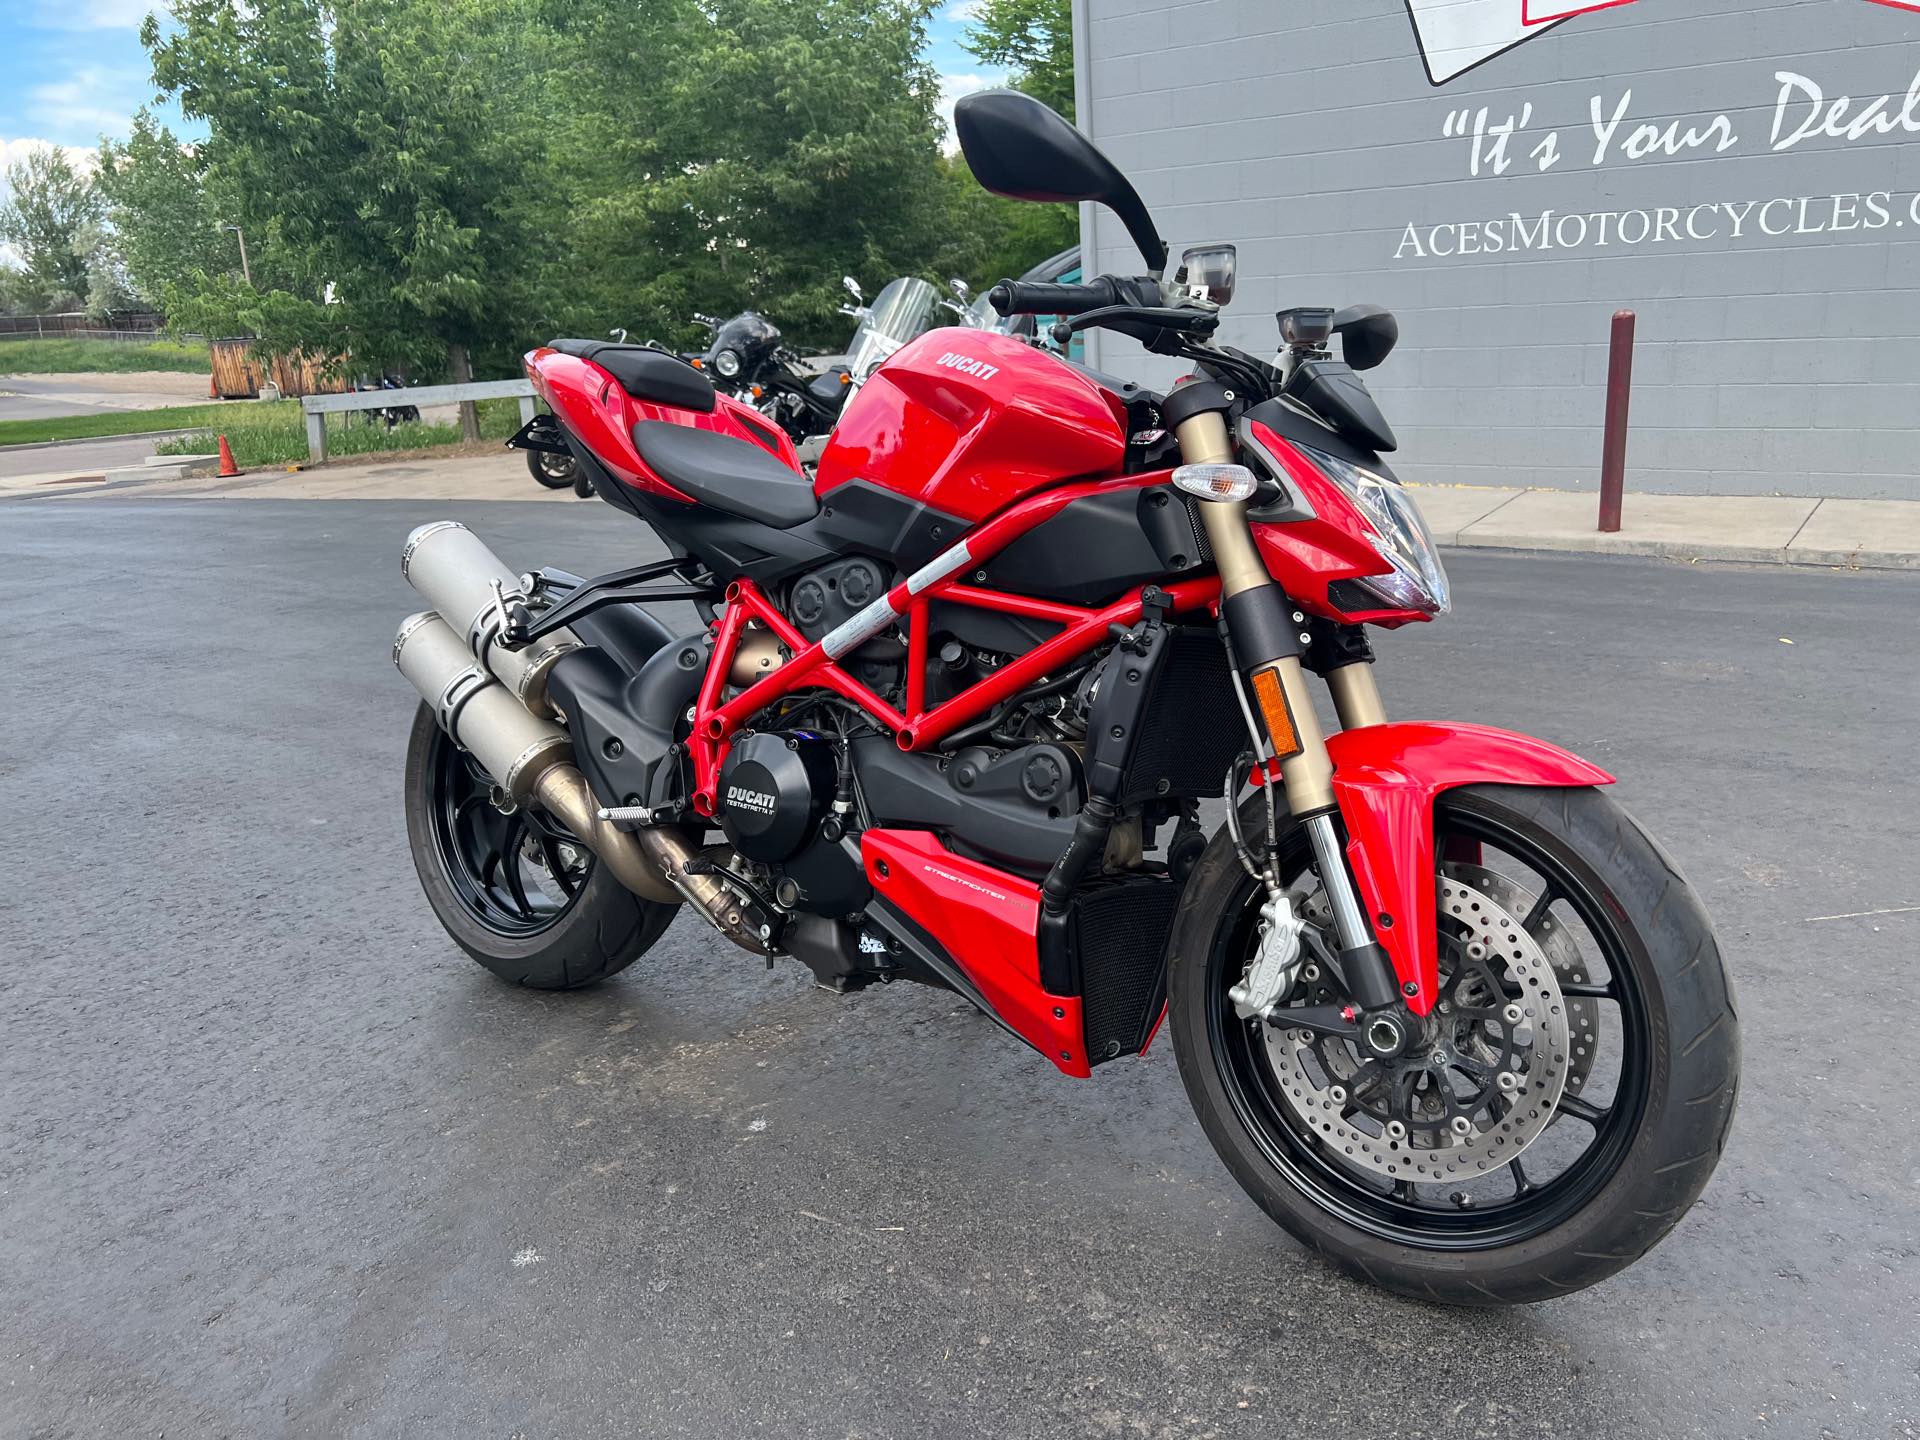 2015 Ducati Streetfighter 848 at Aces Motorcycles - Fort Collins